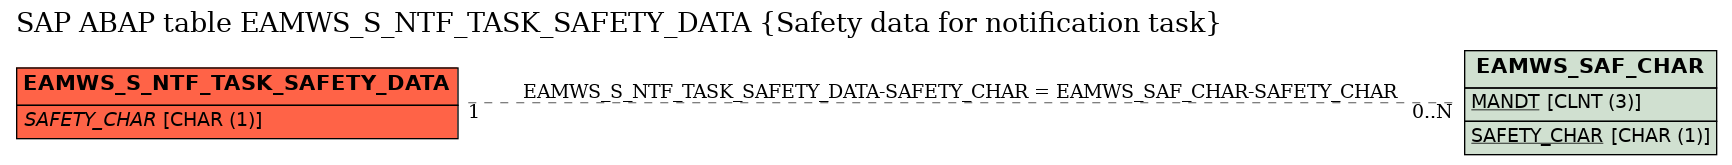 E-R Diagram for table EAMWS_S_NTF_TASK_SAFETY_DATA (Safety data for notification task)